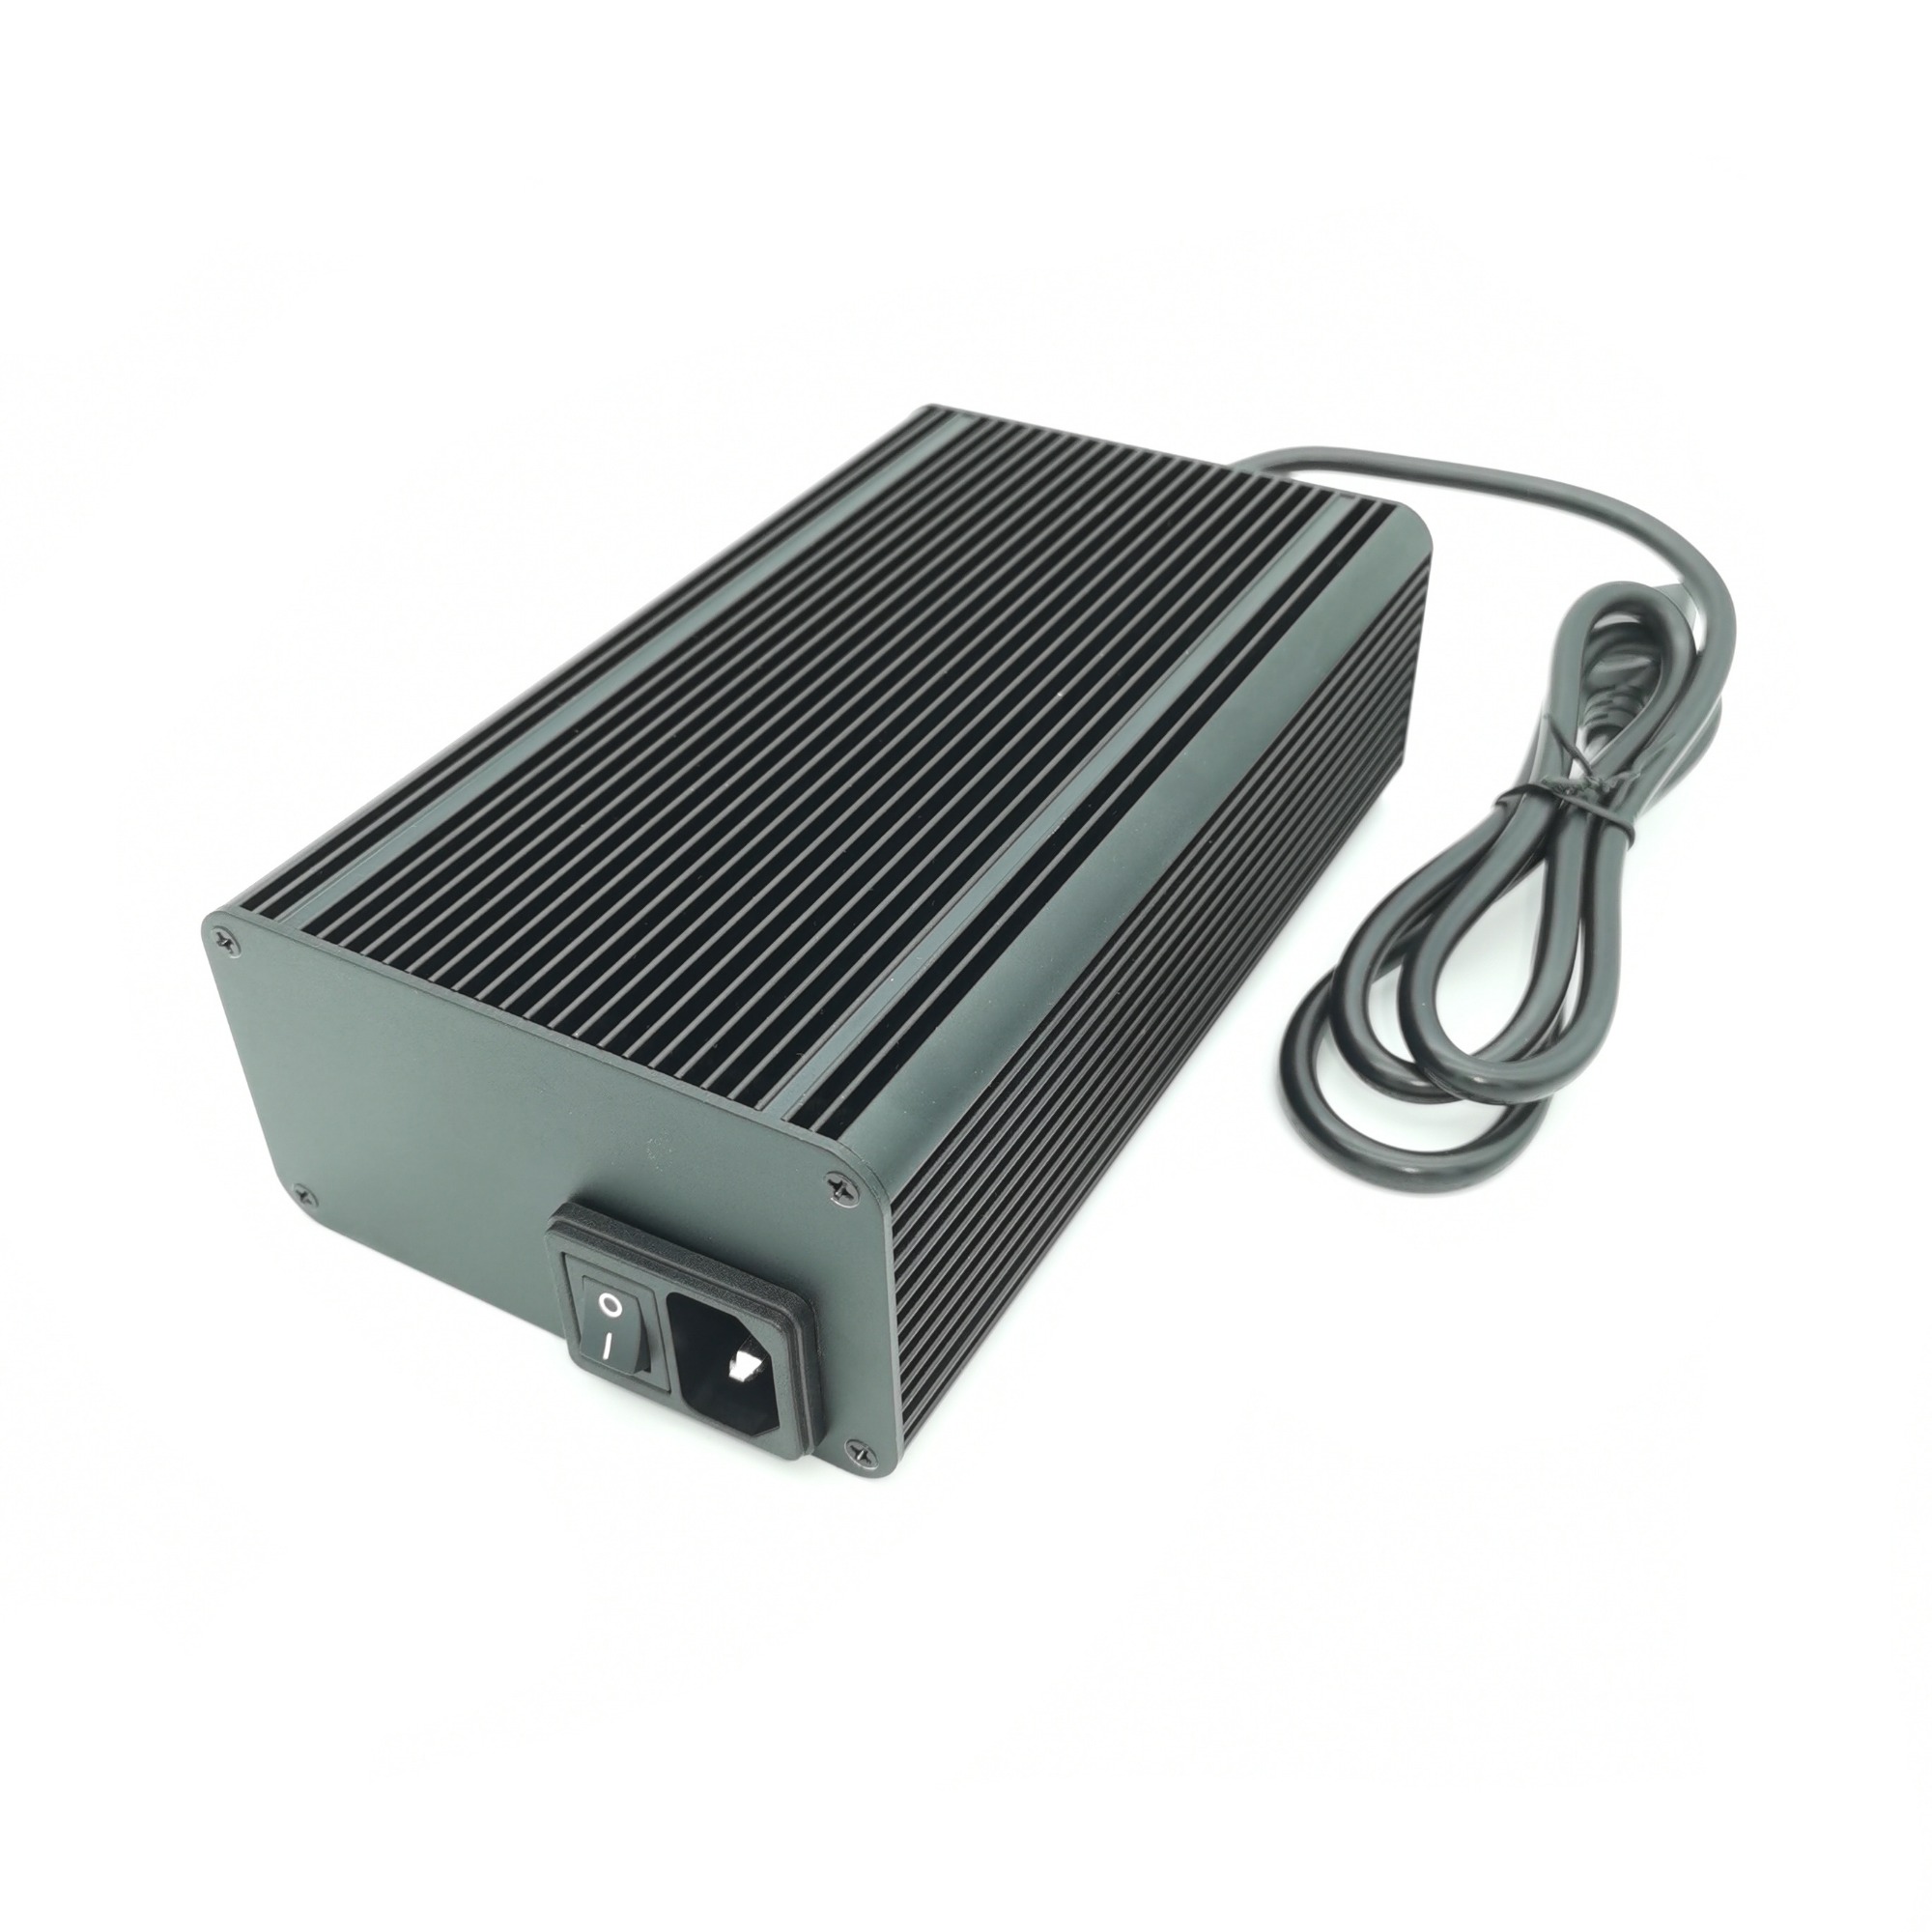 Smart Dustproof design 67.2V 4A Lithium battery charger For 60V 16S Li-ion Battery charger Electric Scooter E-bike motorcycle